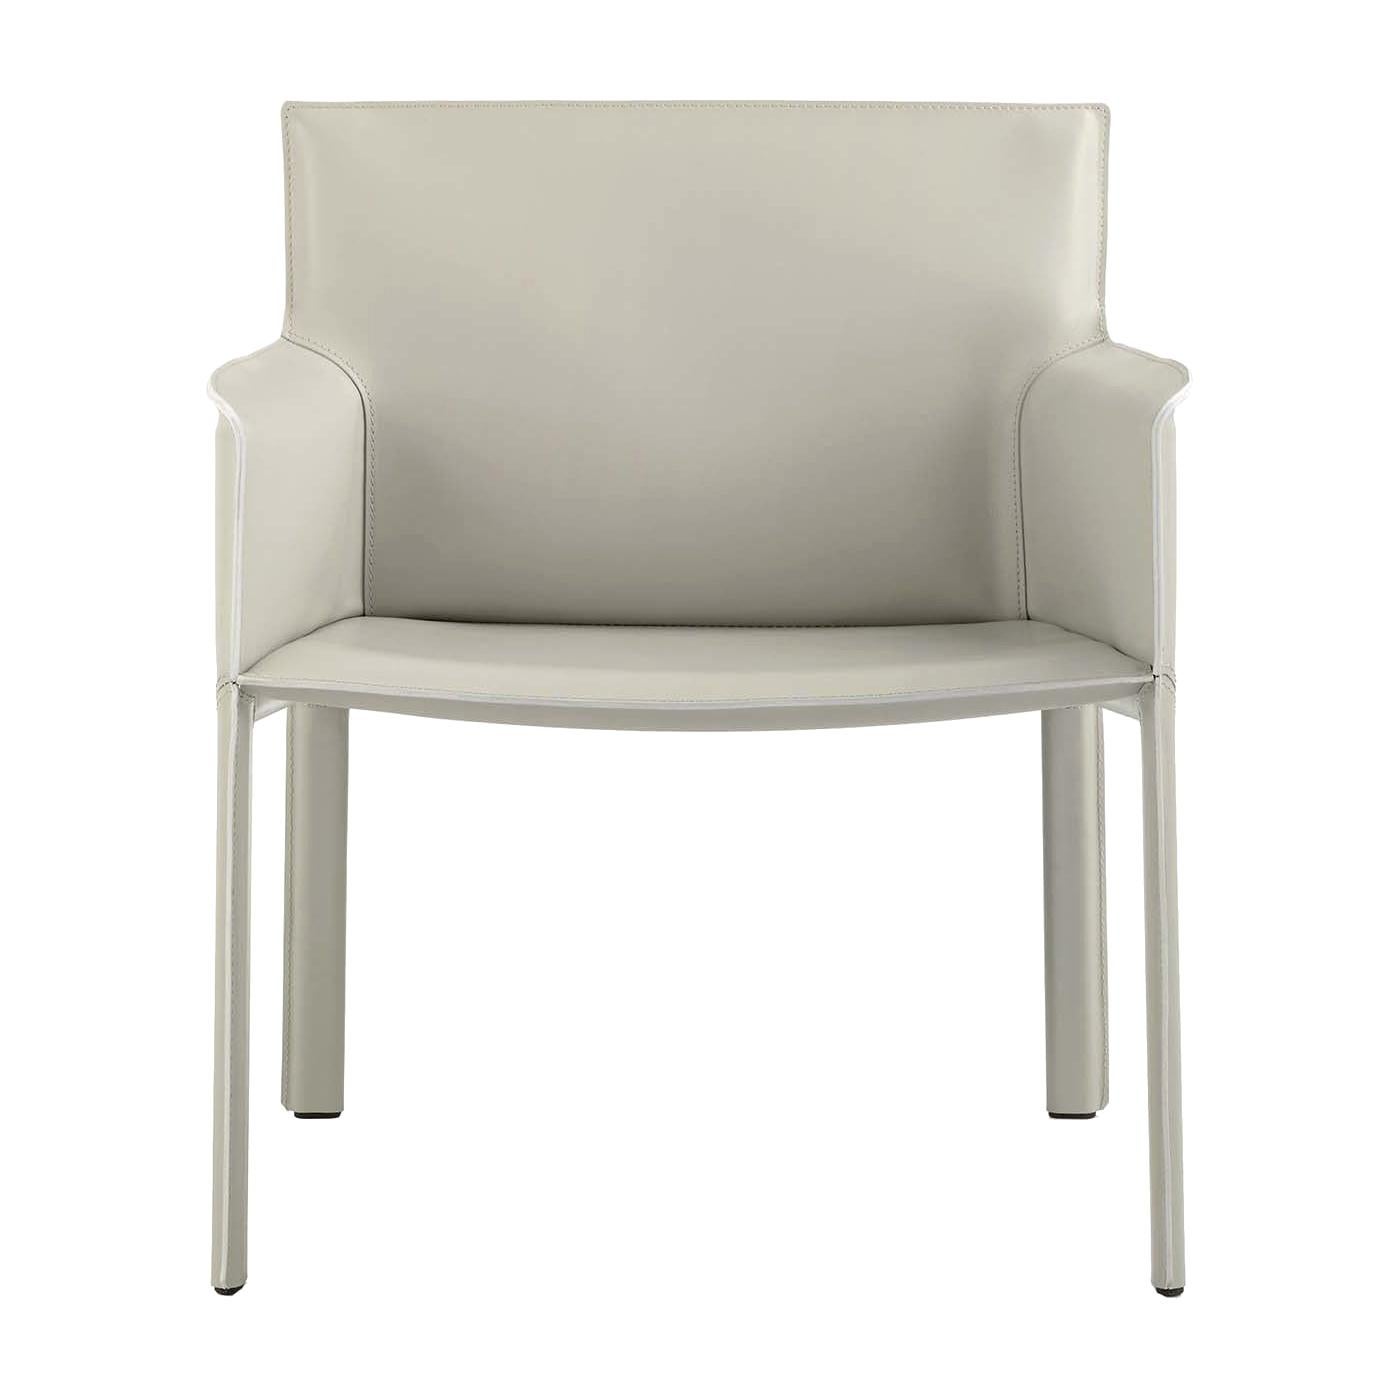 Pasqualina Relax Armchair by Grassi & Bianchi For Sale